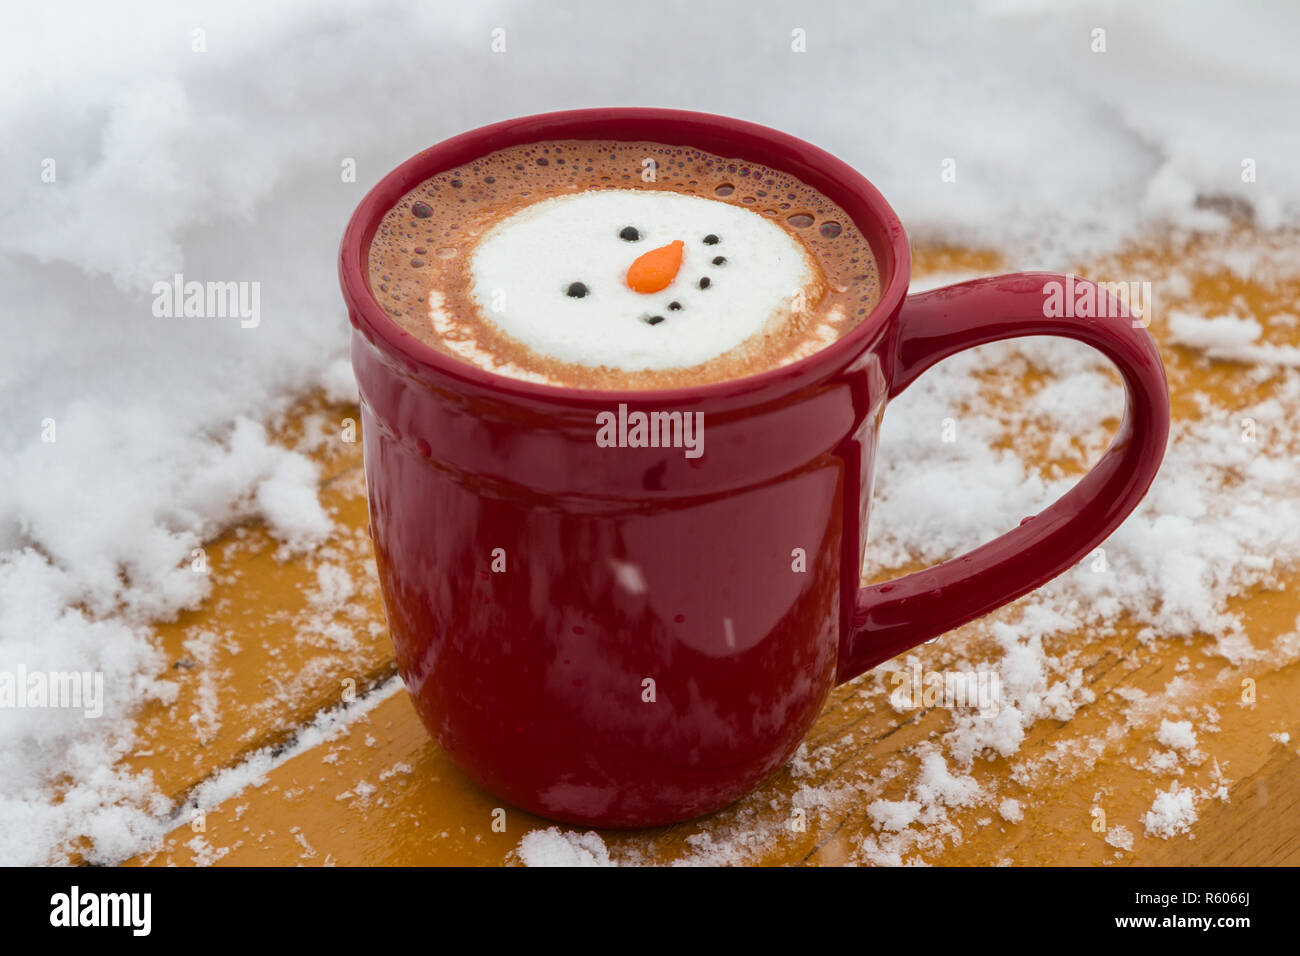 hot cocoa beverage mixed with Irish whiskey garnished with a smiling snow-person marshmallow Stock Photo